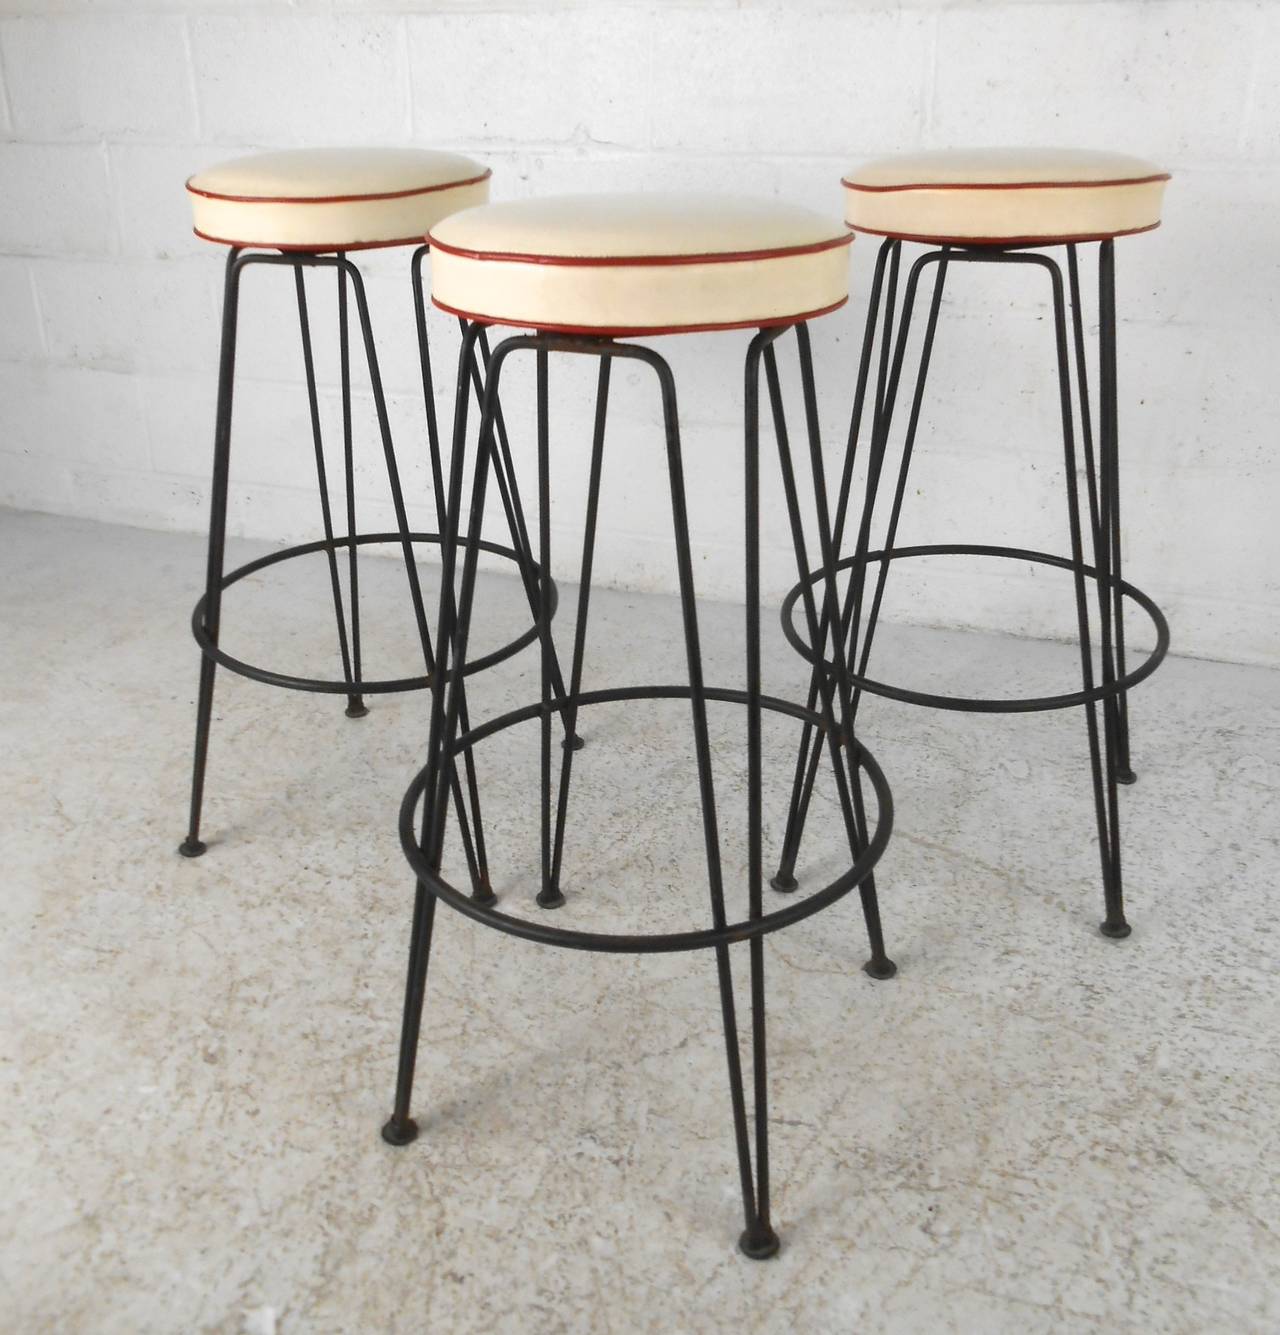 This set of of Mid-Century modern hairpin leg barstools feature intact vintage vinyl seats on sturdy cast iron bases. Swivel seats make these a unique set for any bar setting. Please confirm item location (NY or NJ).